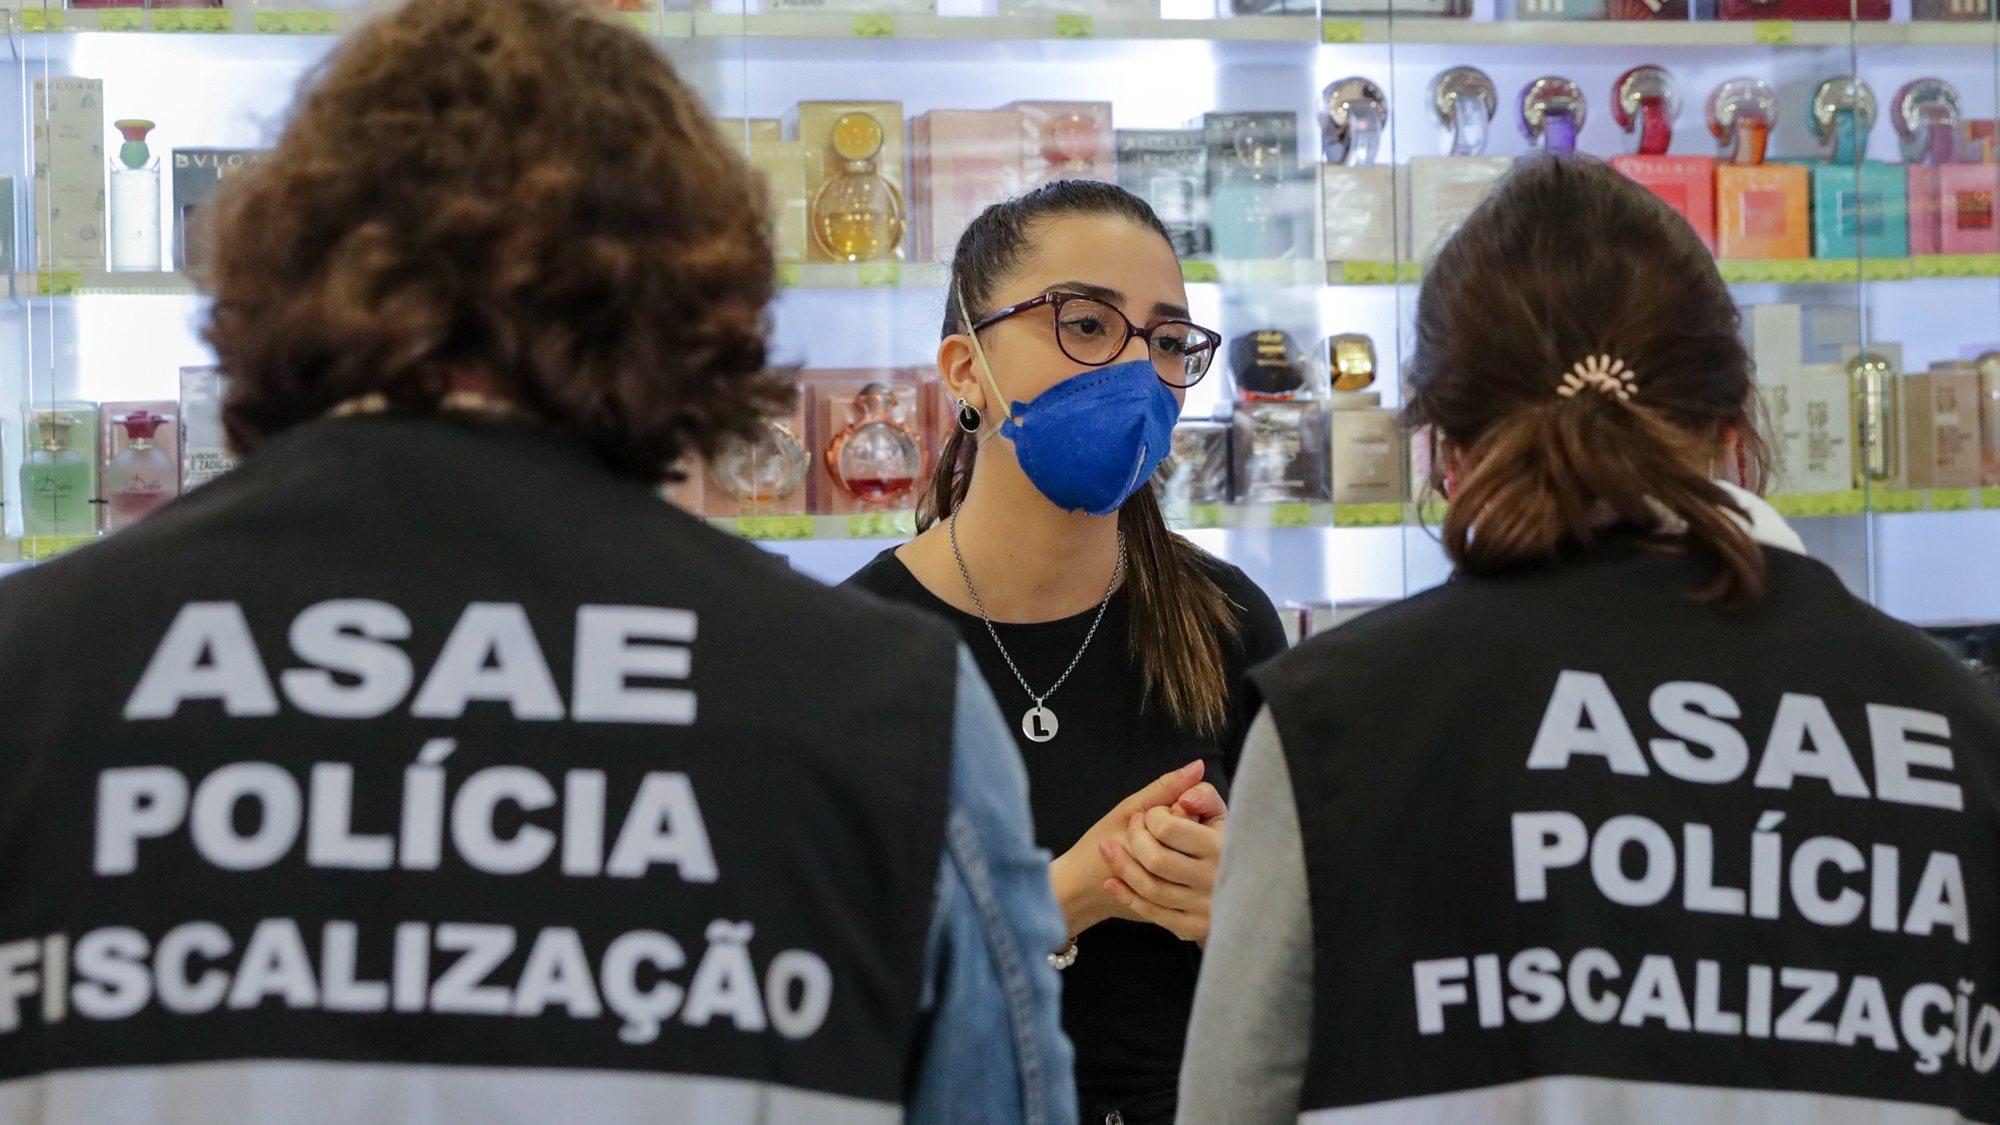 epa08380620 An inspector of Food and Economic Security Authority (ASAE) checks prices and packaging of sanitizer gel and masks at a medical supply store in Moscavide, Loures, Portugal, 23 April 2020. ASAE teams have started a nationwide inspection of the price of protective and cleaning items. Countries around the world are taking increased measures to stem the widespread of the SARS-CoV-2 coronavirus which causes the Covid-19 disease.  EPA/TIAGO PETINGA